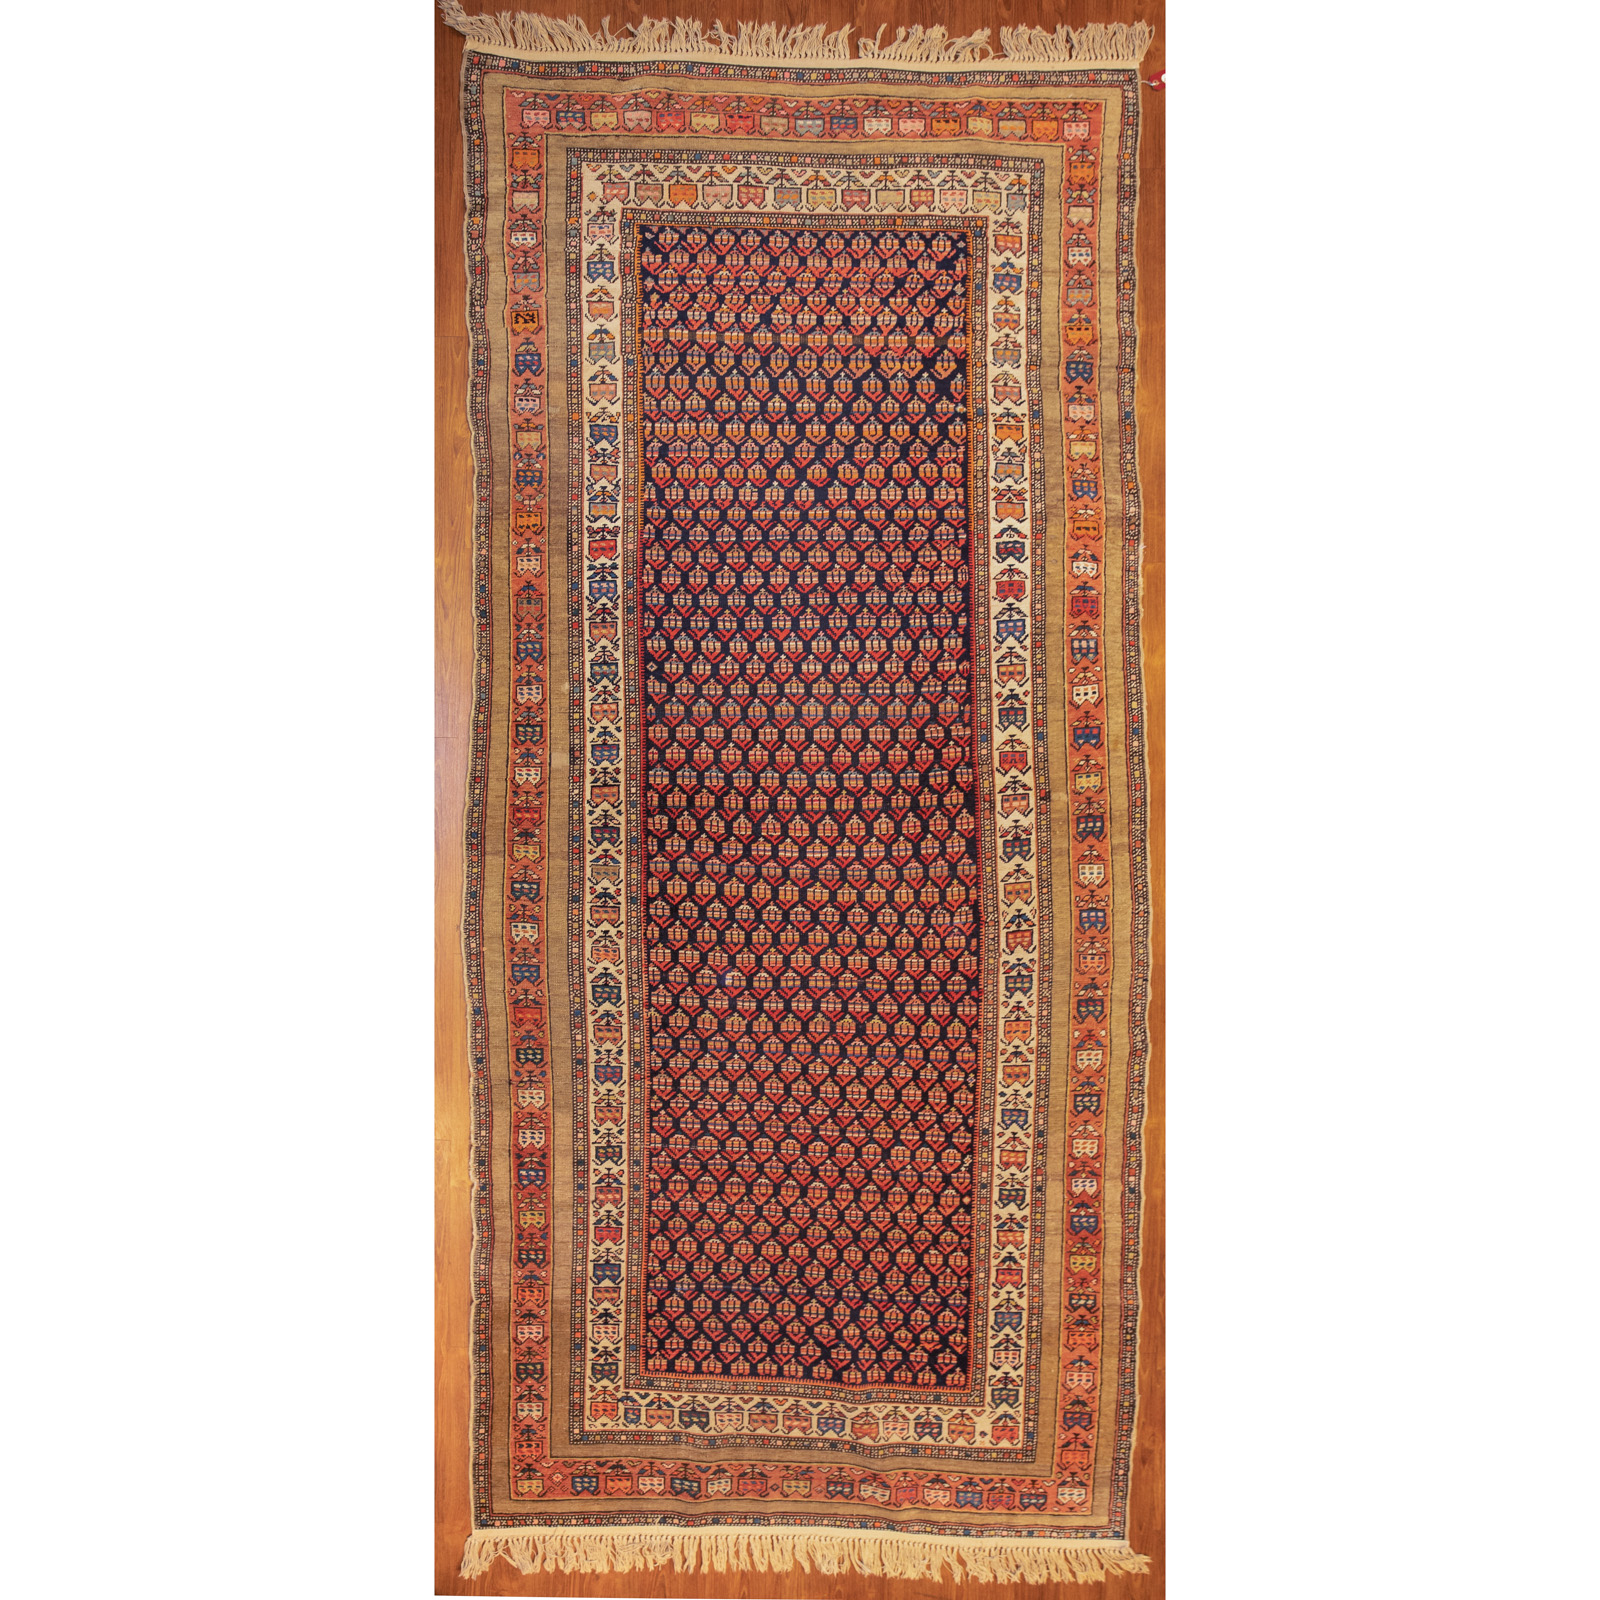 ANTIQUE MALAYER RUNNER, PERSIA,